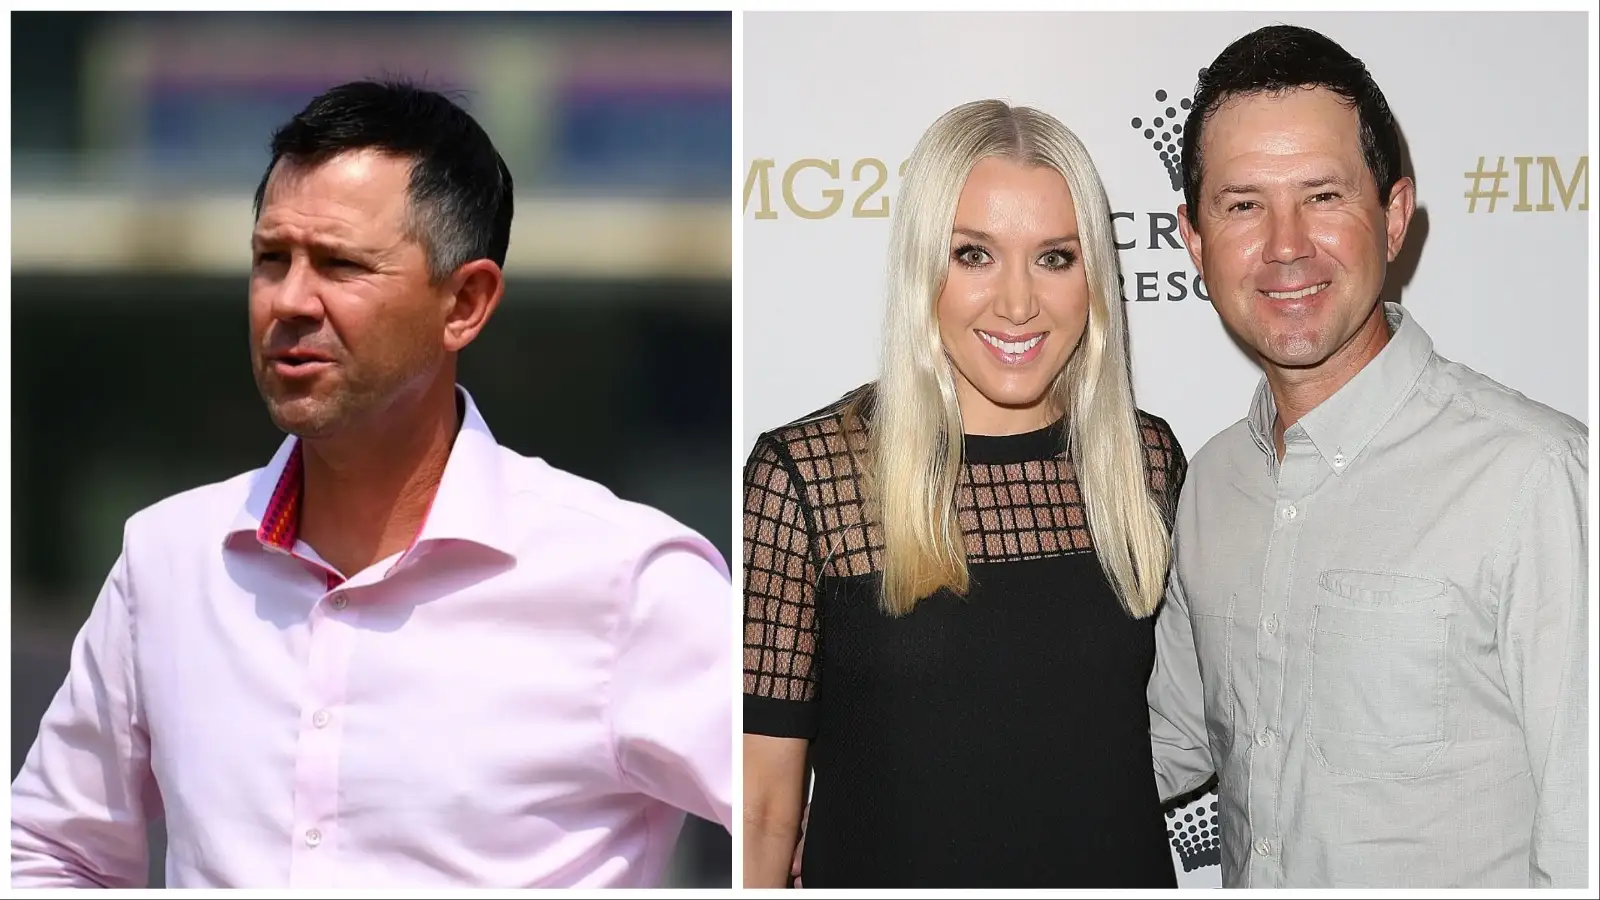 Who is Ricky Ponting Wife? Know all about Rianna Ponting